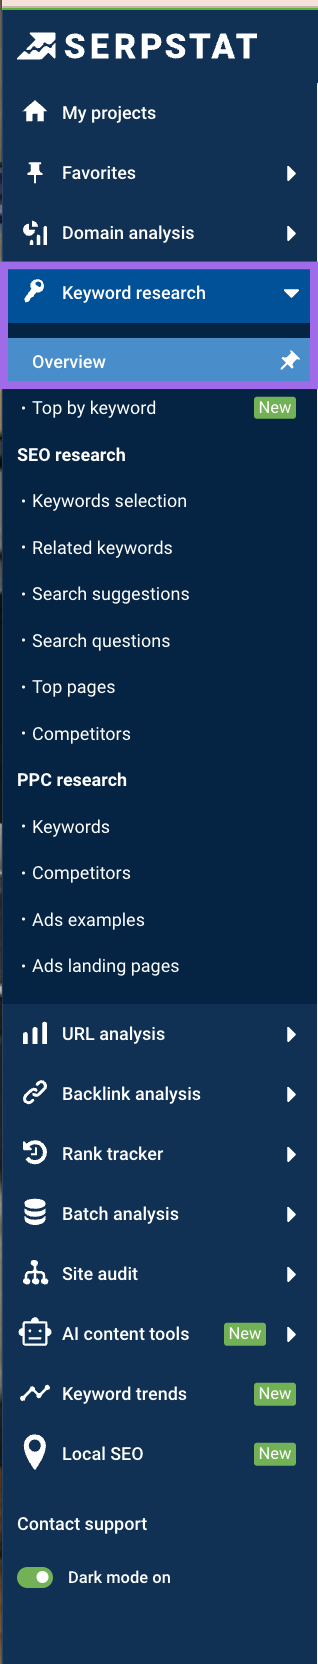 serpstat keyword research feature reviewed